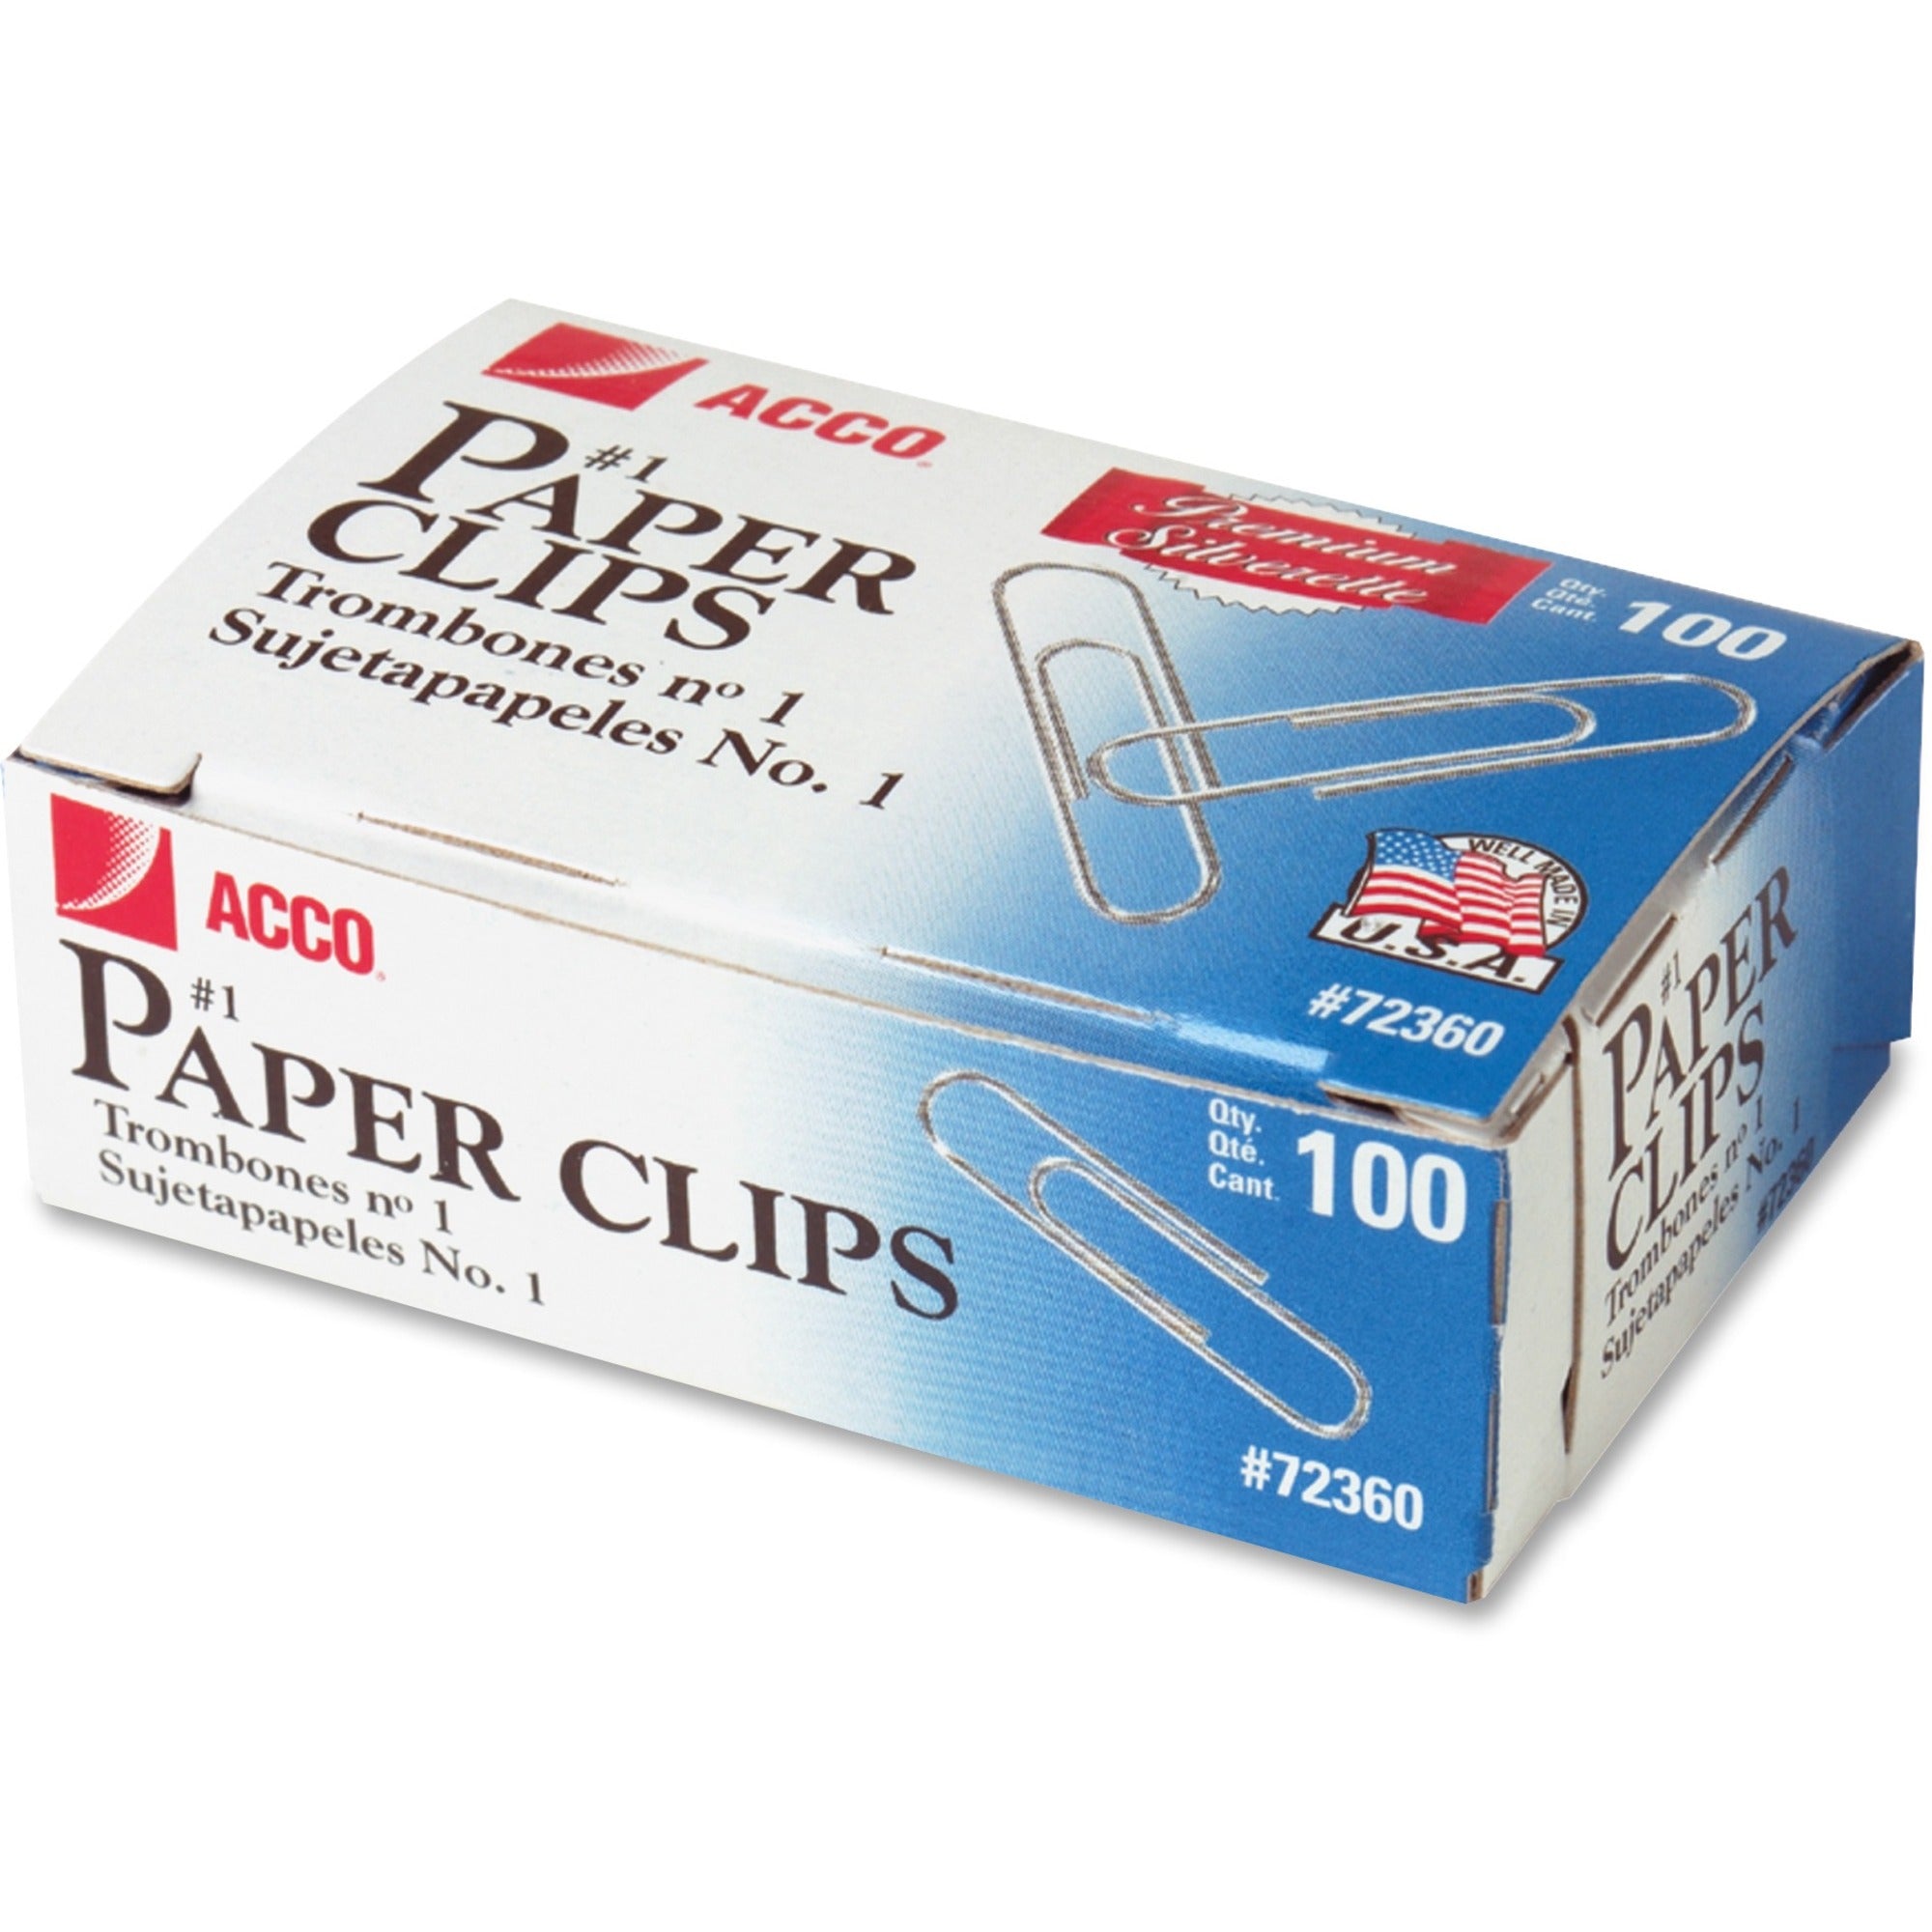 acco-premium-paper-clips-no-1-10-sheet-capacity-galvanized-corrosion-resistant-10-pack-silver-metal-zinc-plated_acc72360 - 1